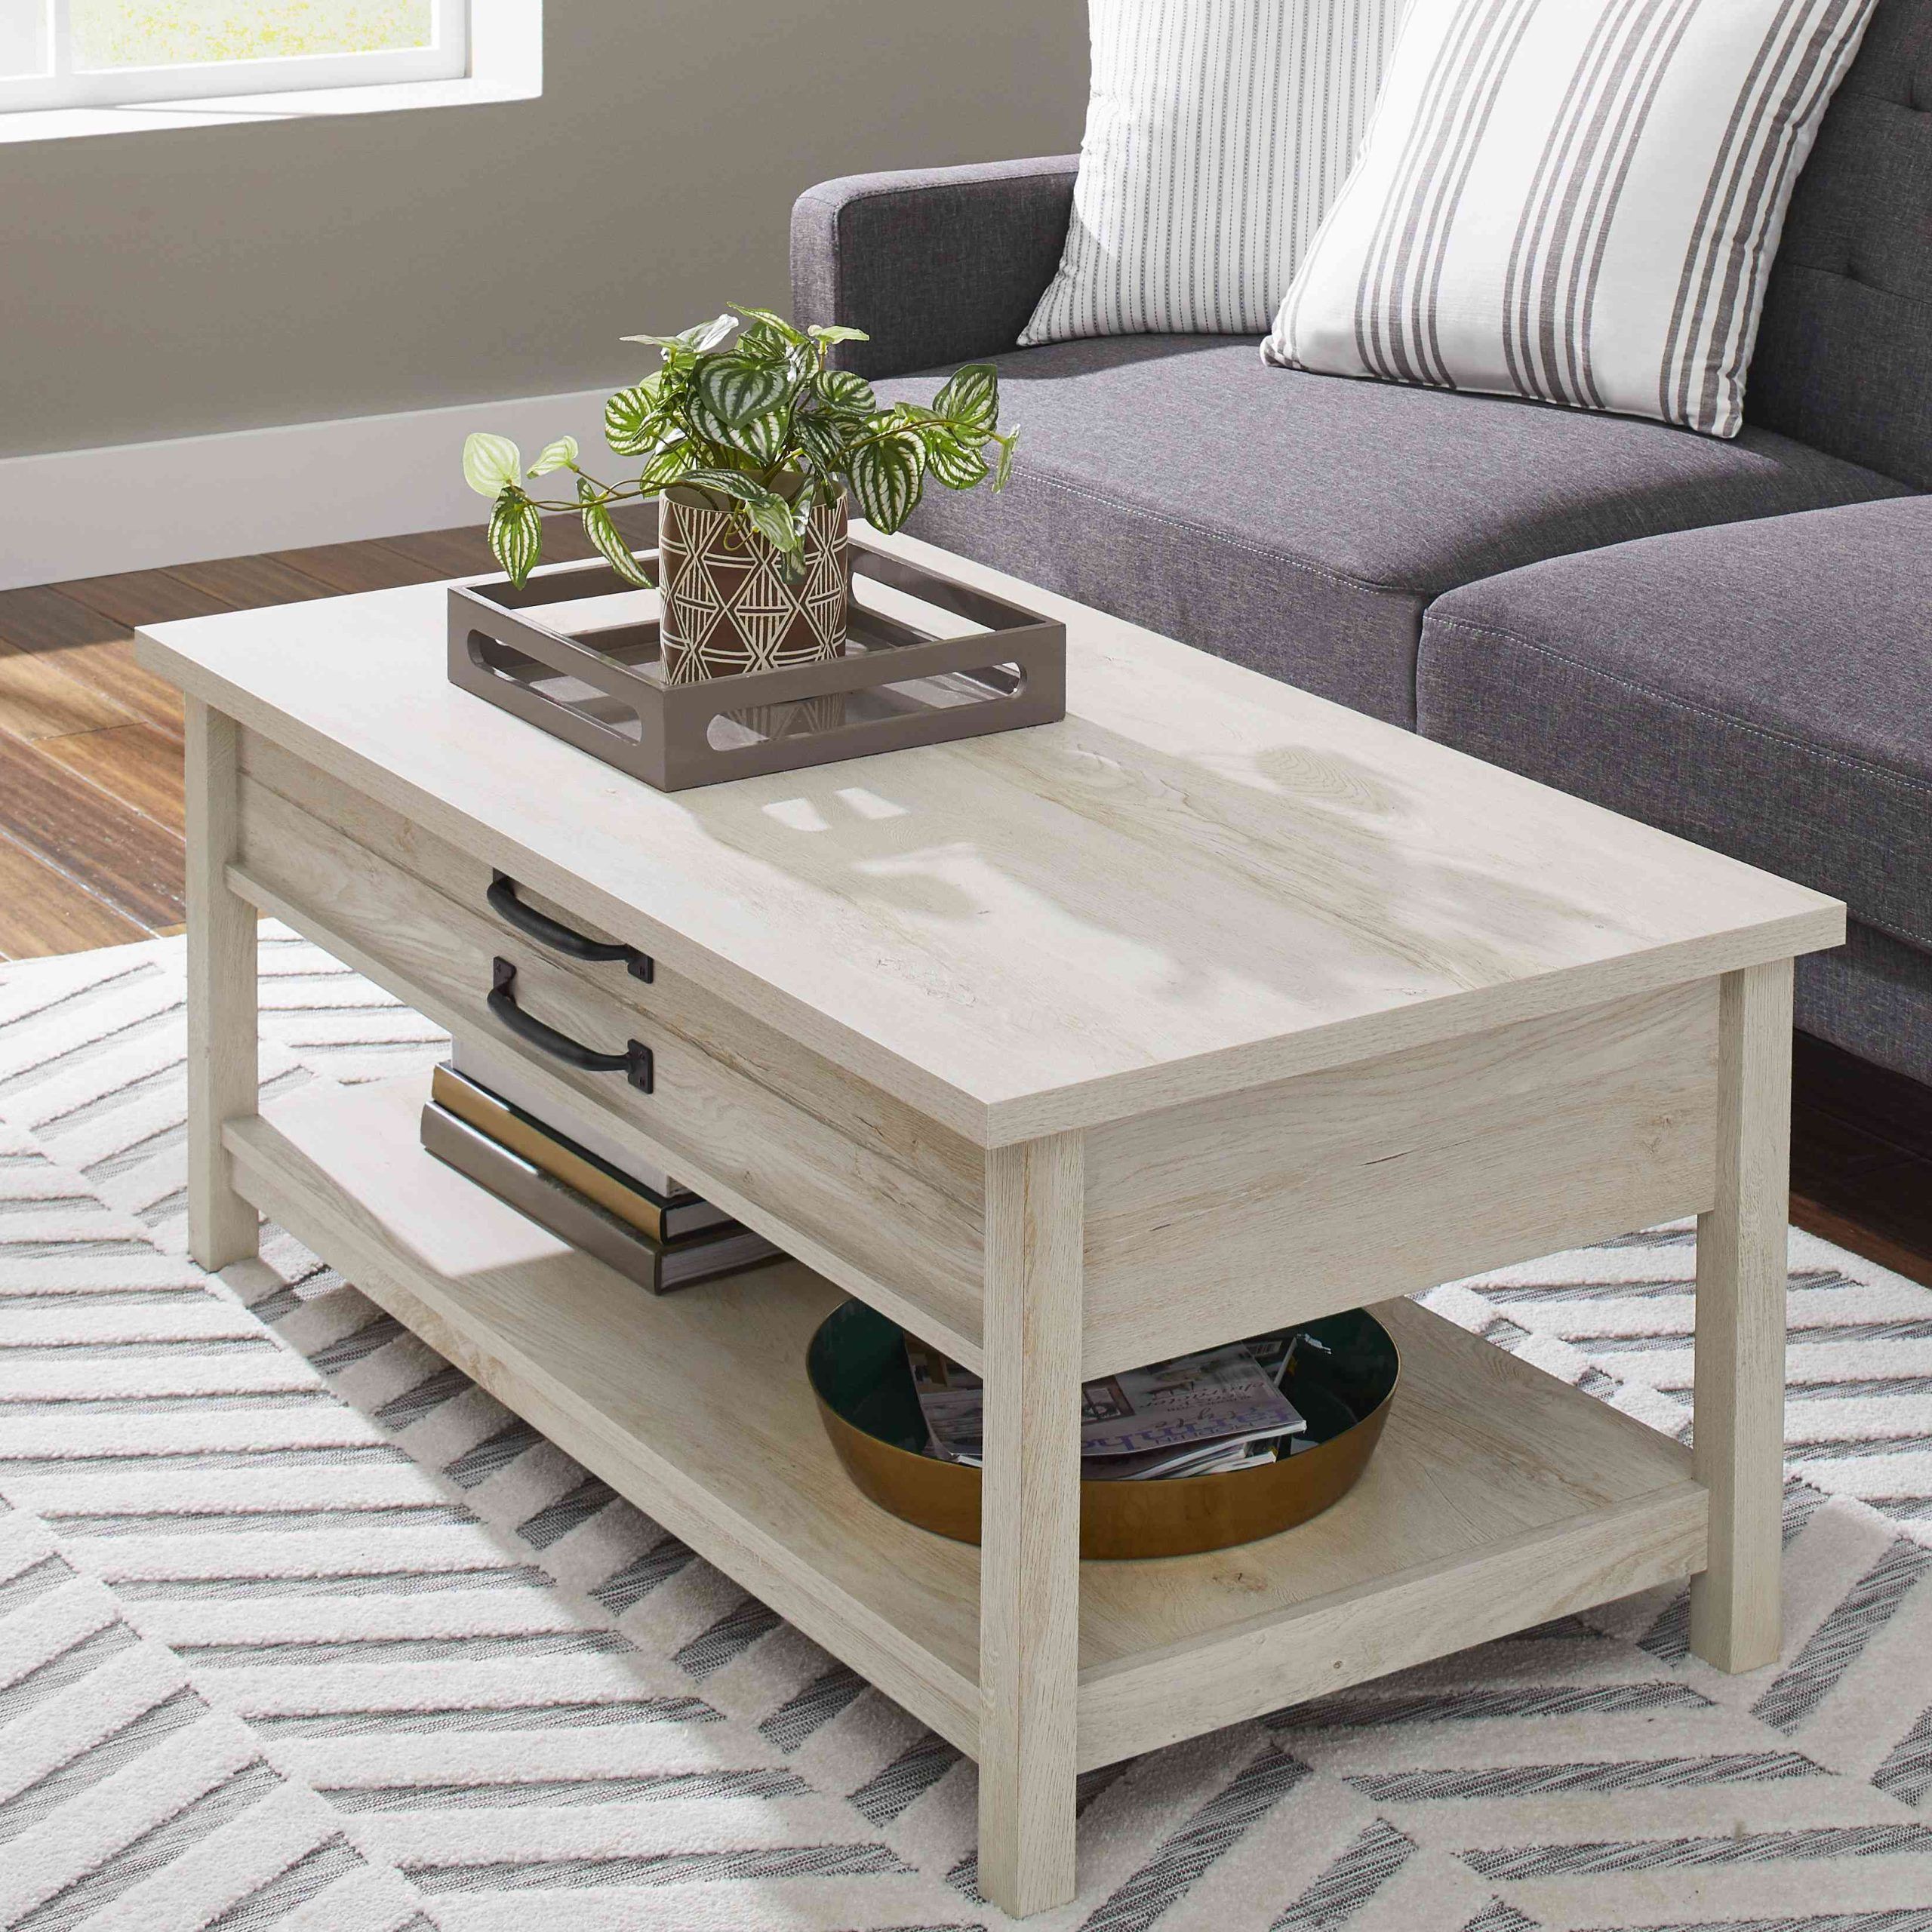 The 9 Best Lift Top Coffee Tables Of 2022 Within Wood Lift Top Coffee Tables (Gallery 4 of 20)